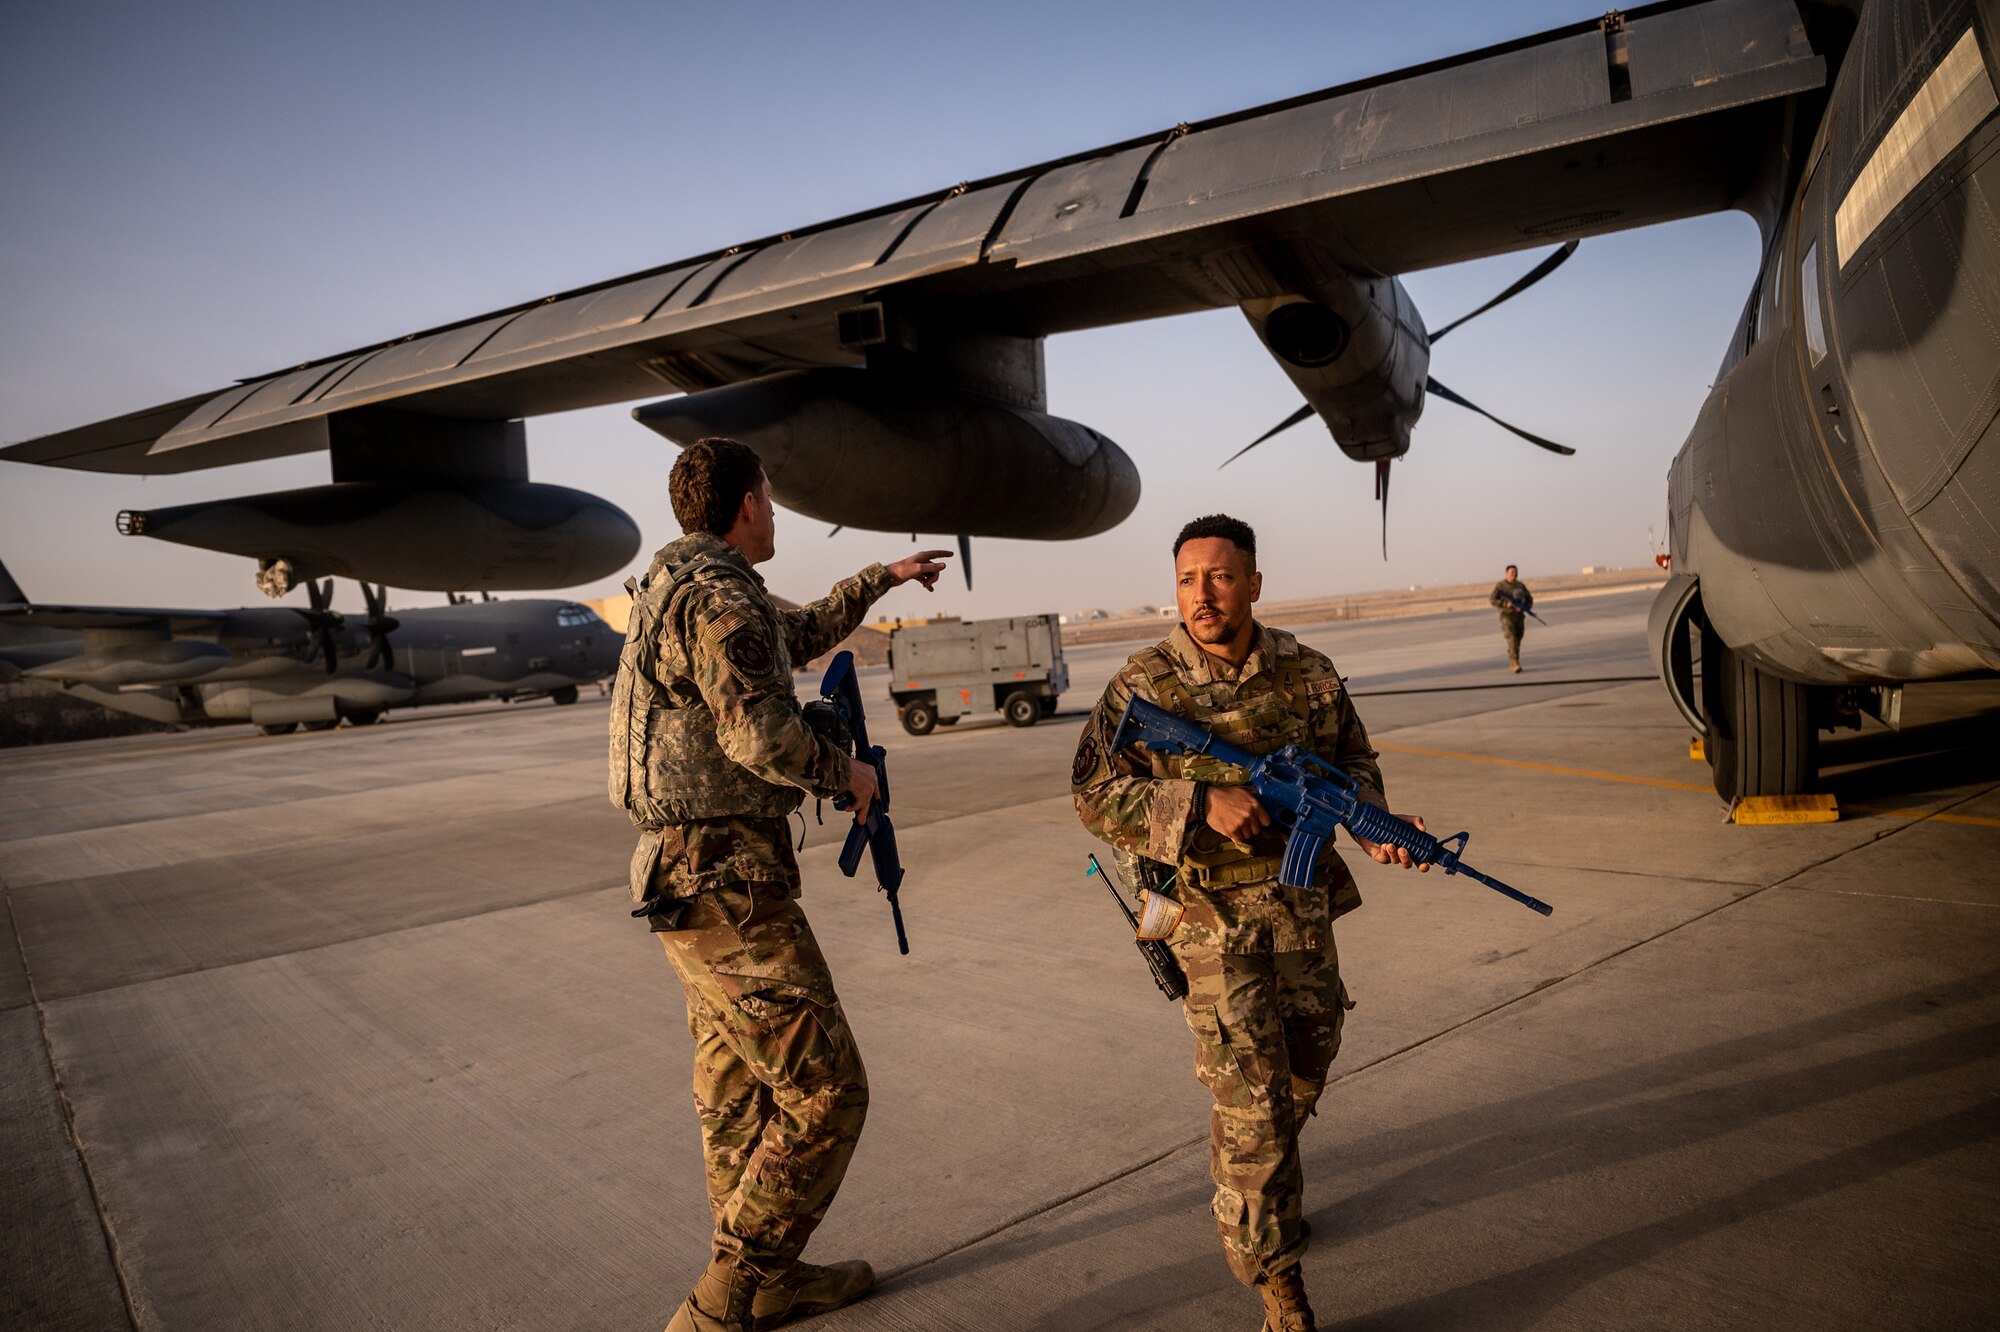 Airmen from the 801st Expeditionary Maintenance Squadron respond to simulated threats during airfield security operations training led by the 332d Expeditionary Security Forces Squadron at an undisclosed location in Southwest Asia, April 5, 2022. The training focused on small team perimeter security, personnel placement for aircraft defense, and basic defense postures. (U.S. Air Force photo by Master Sgt. Christopher Parr)